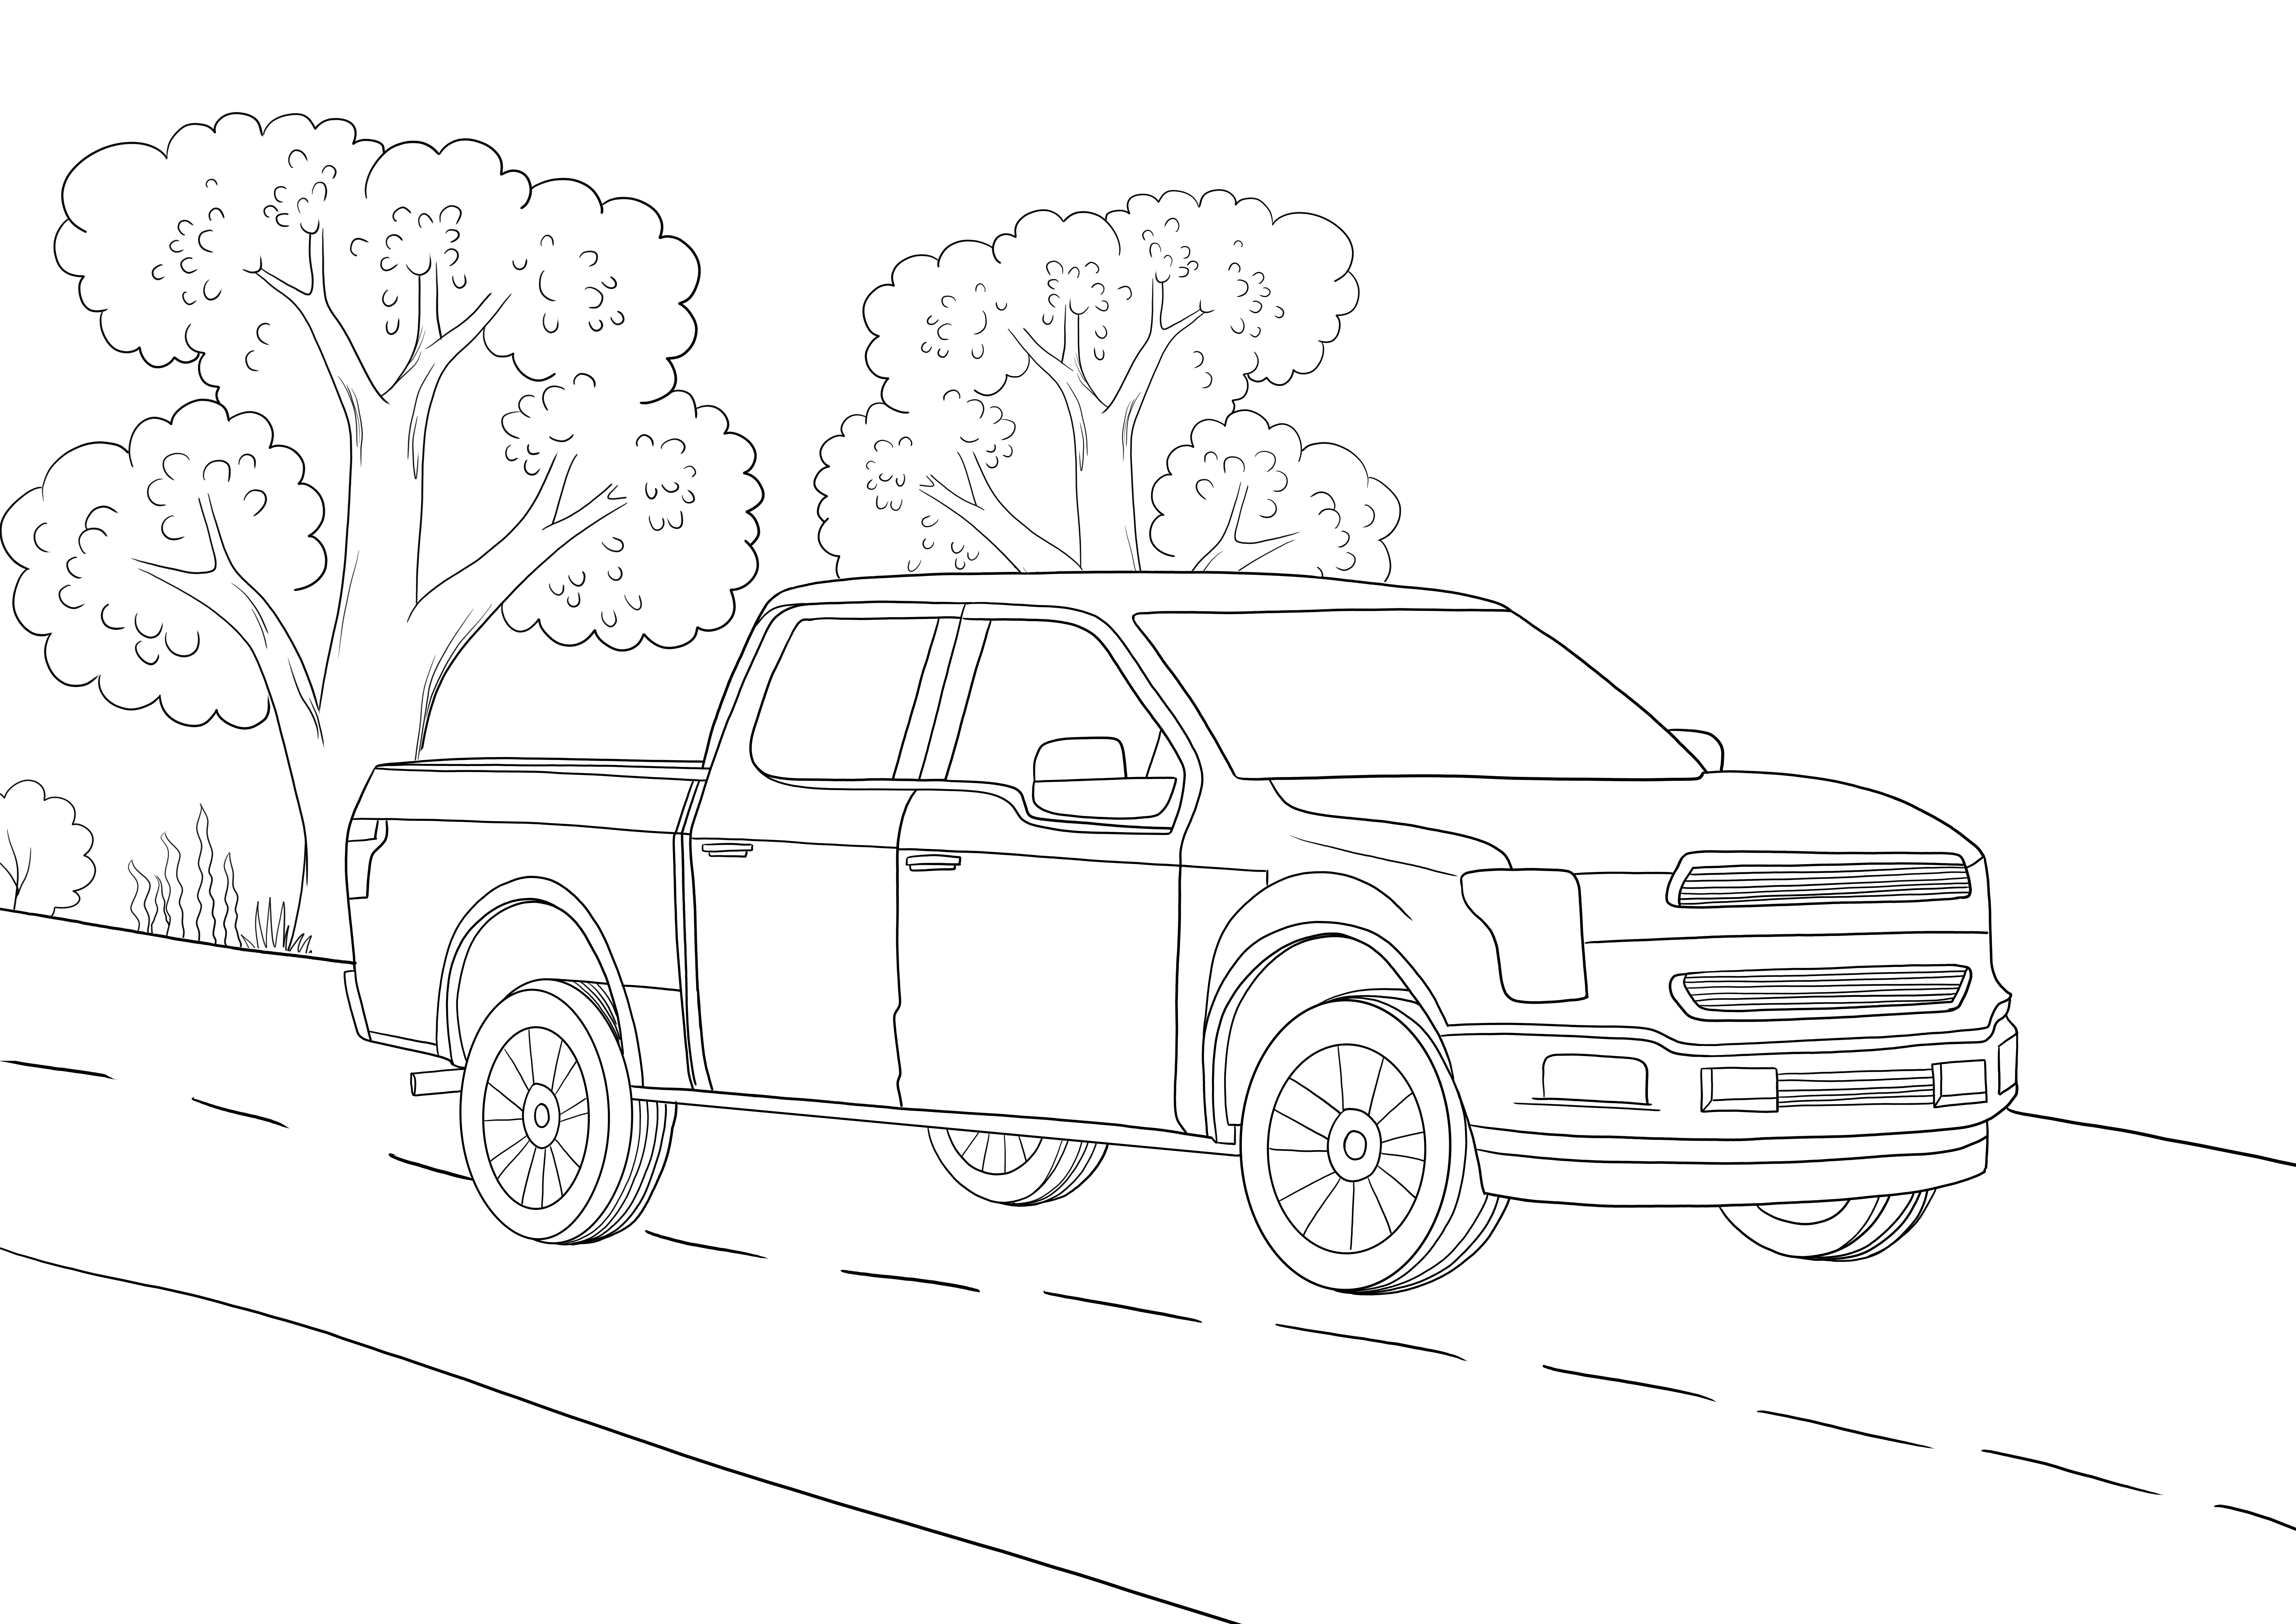 Pick-up truck for free printing and coloring sheet